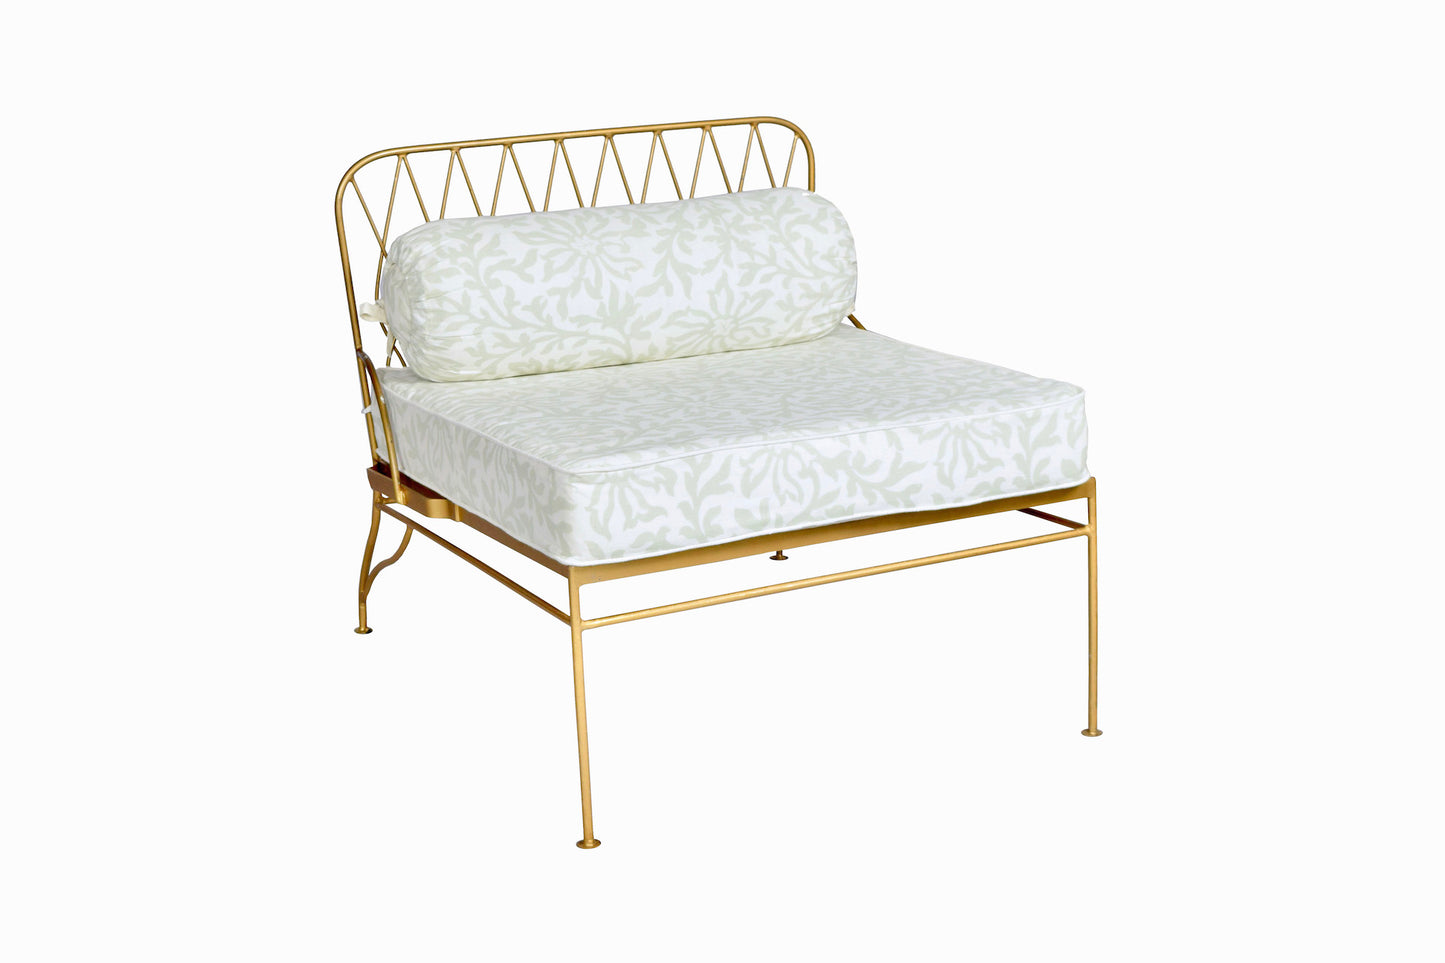 PALM SPRINGS GOLD METAL CHAIR V&A Collaboration in Clematis - Sage Green